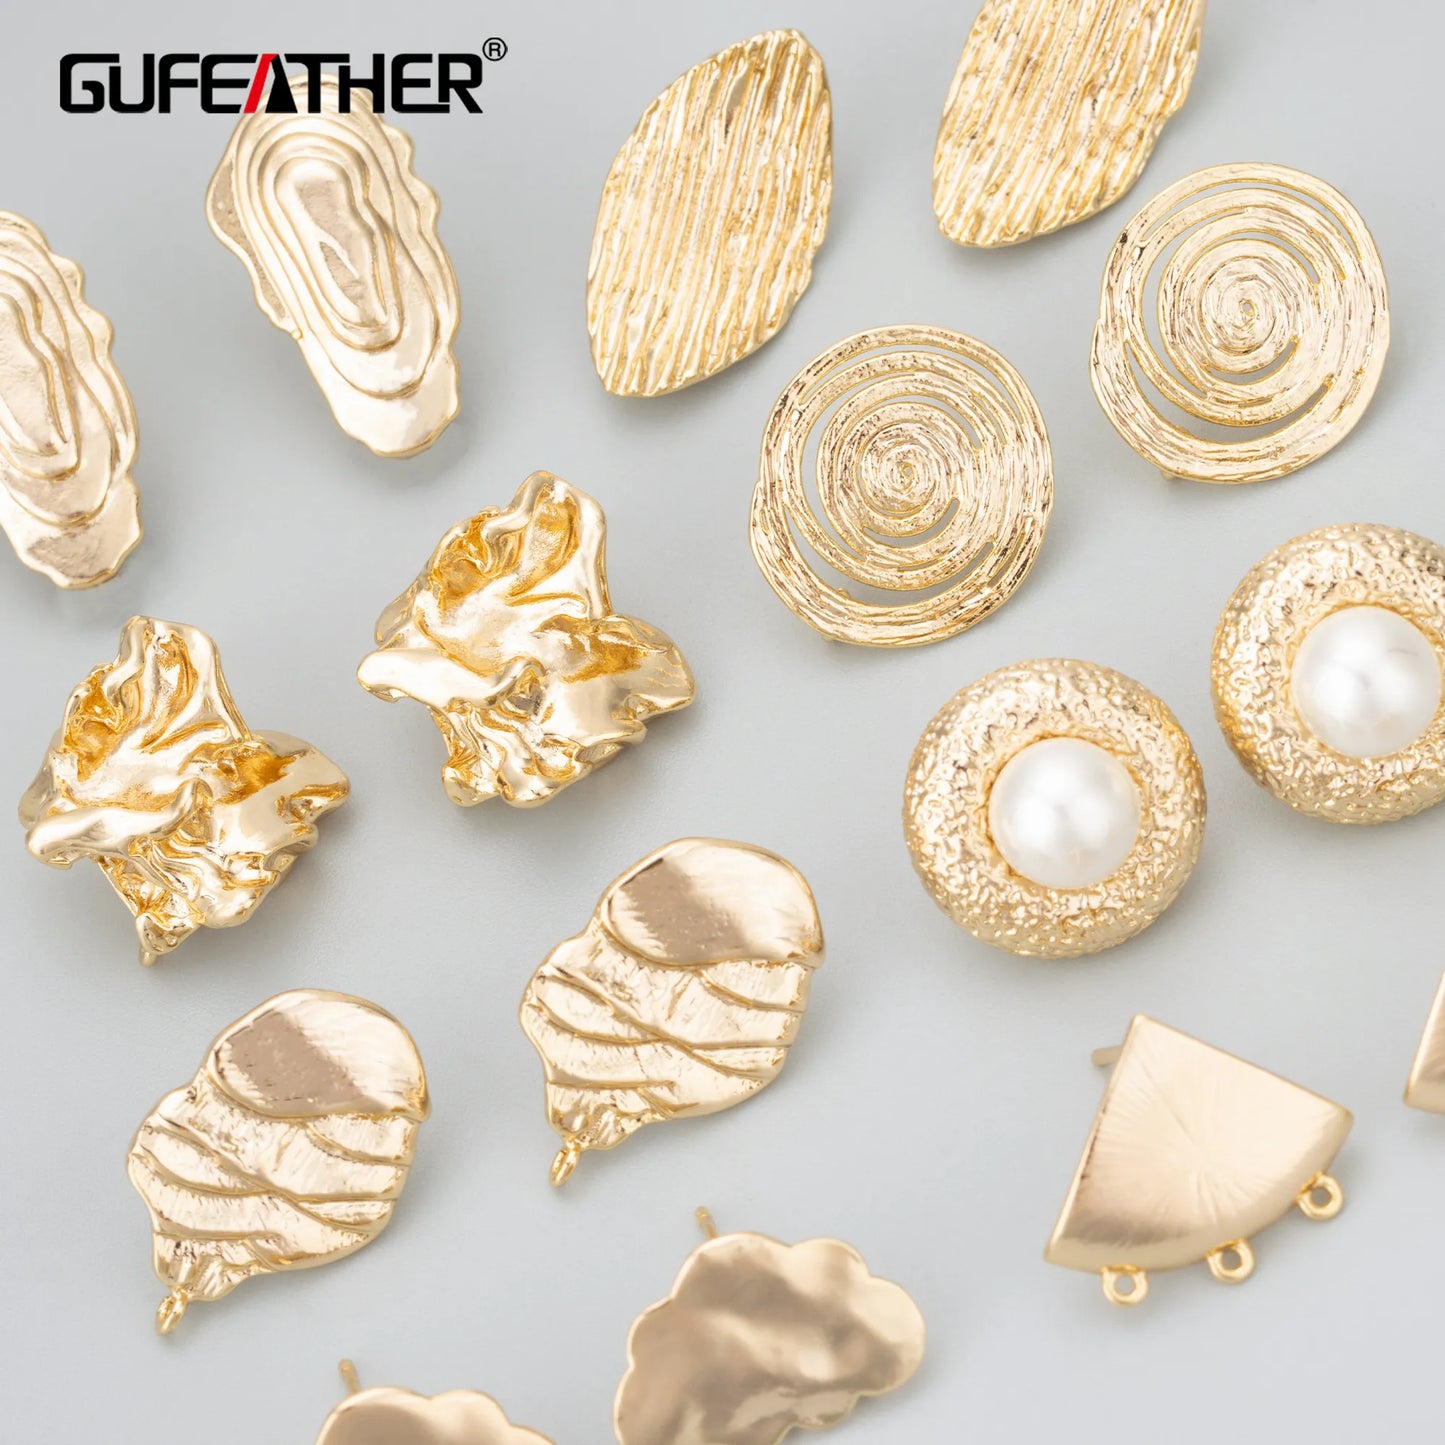 GUFEATHER MD60,jewelry accessories,nickel free,18k gold rhodium plated,copper,jewelry making,charms,diy earrings,4pcs/lot